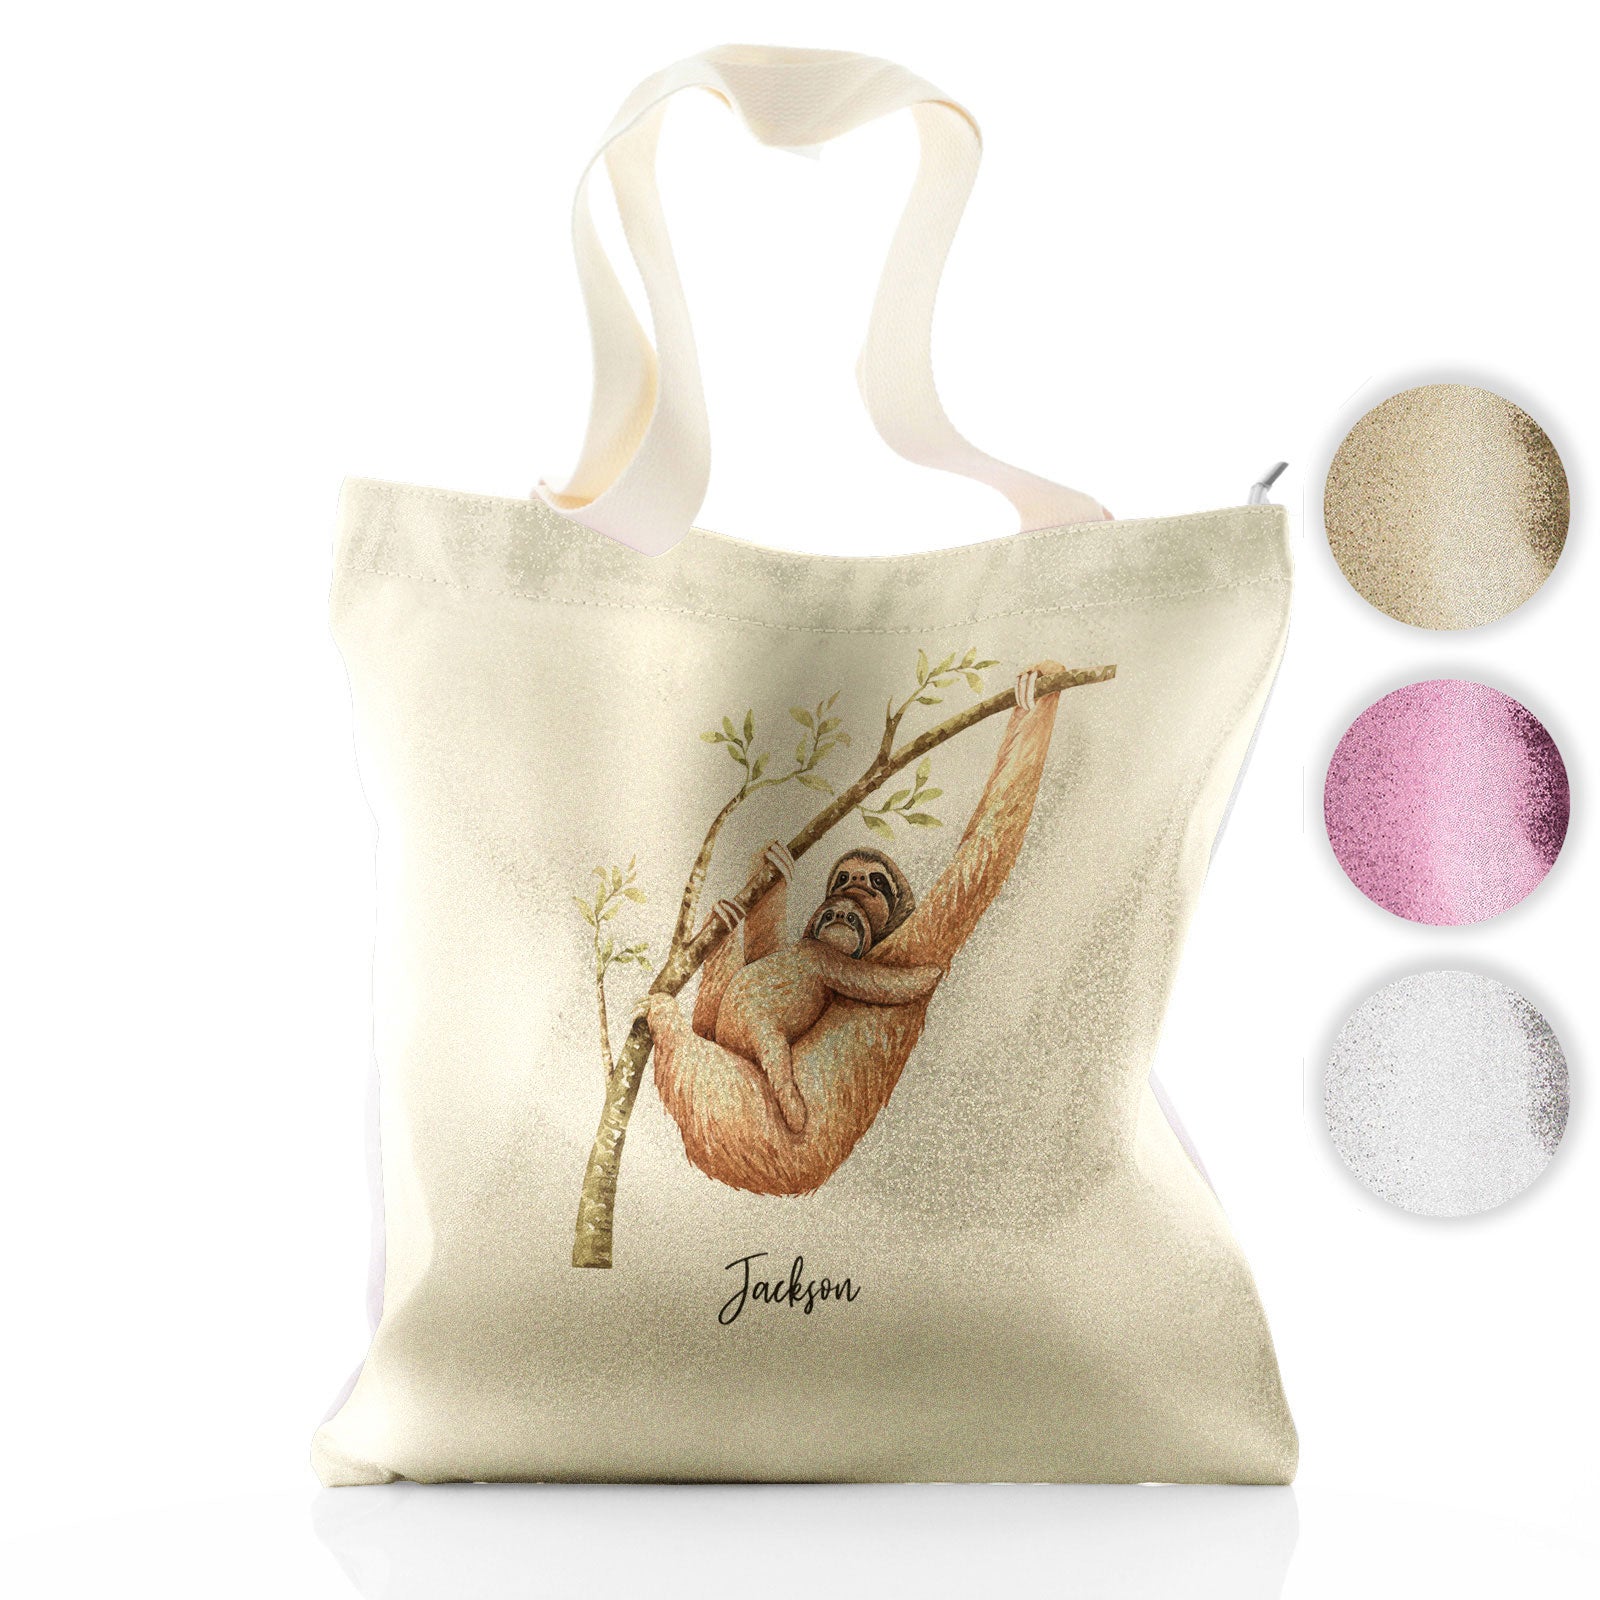 Personalised Glitter Tote Bag with Welcoming Text and Climbing Mum and Baby Sloths